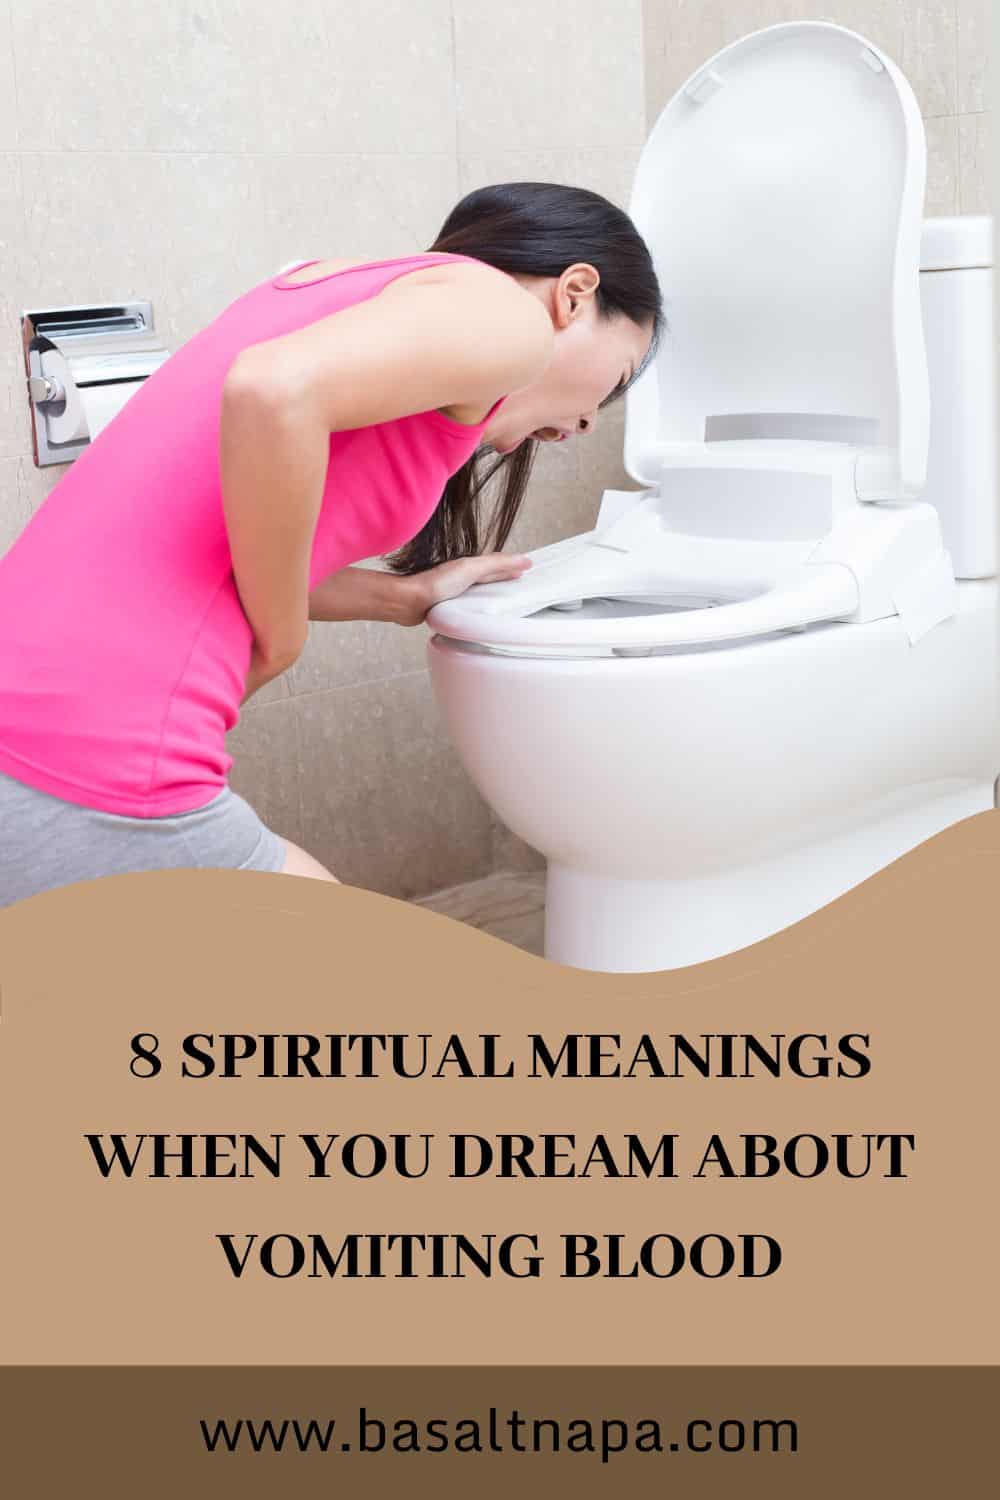 8 meanings to dreaming about vomiting blood